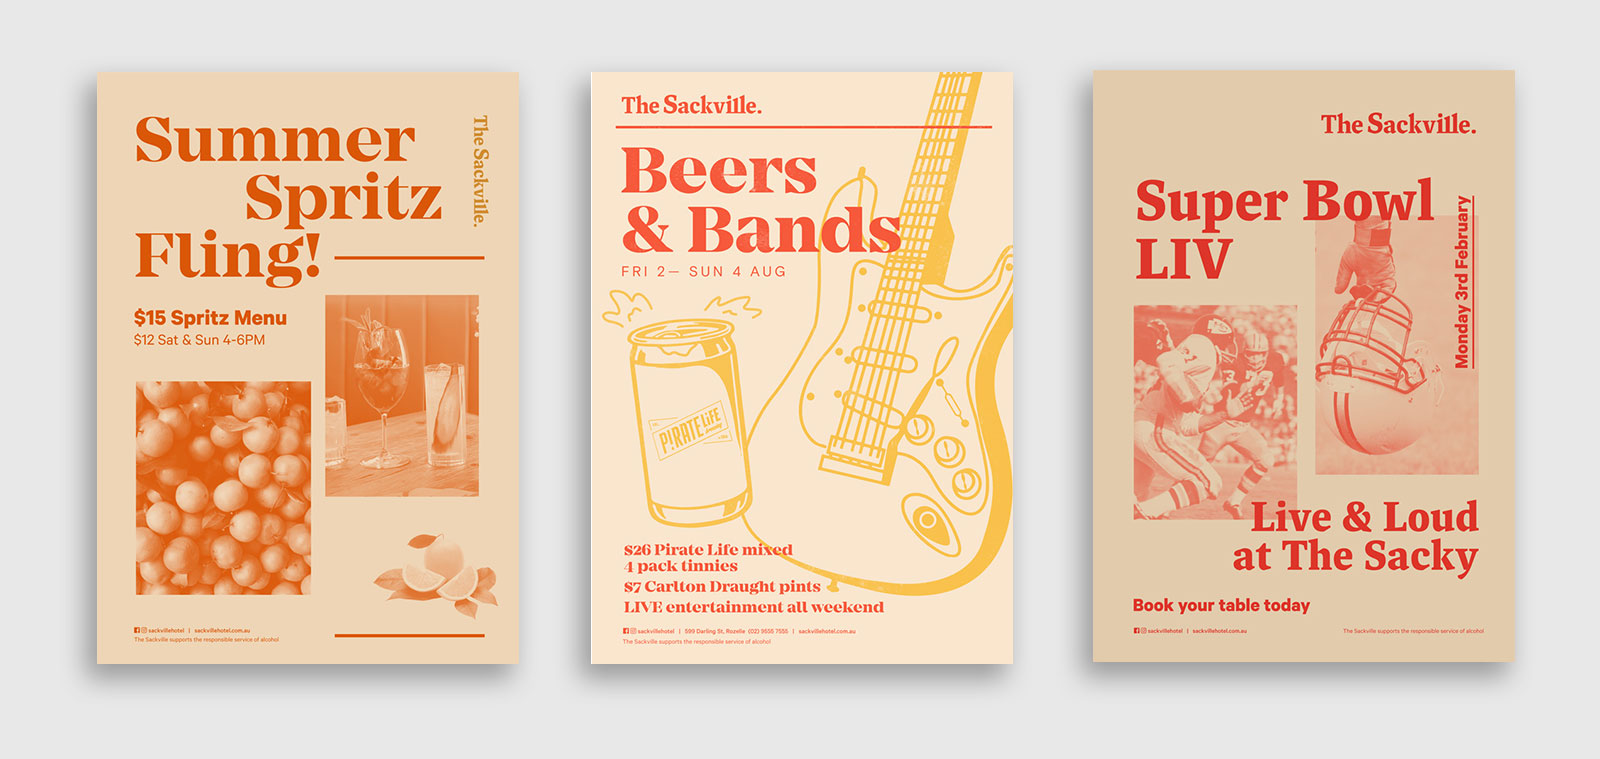 three poster designs for events at the sackville